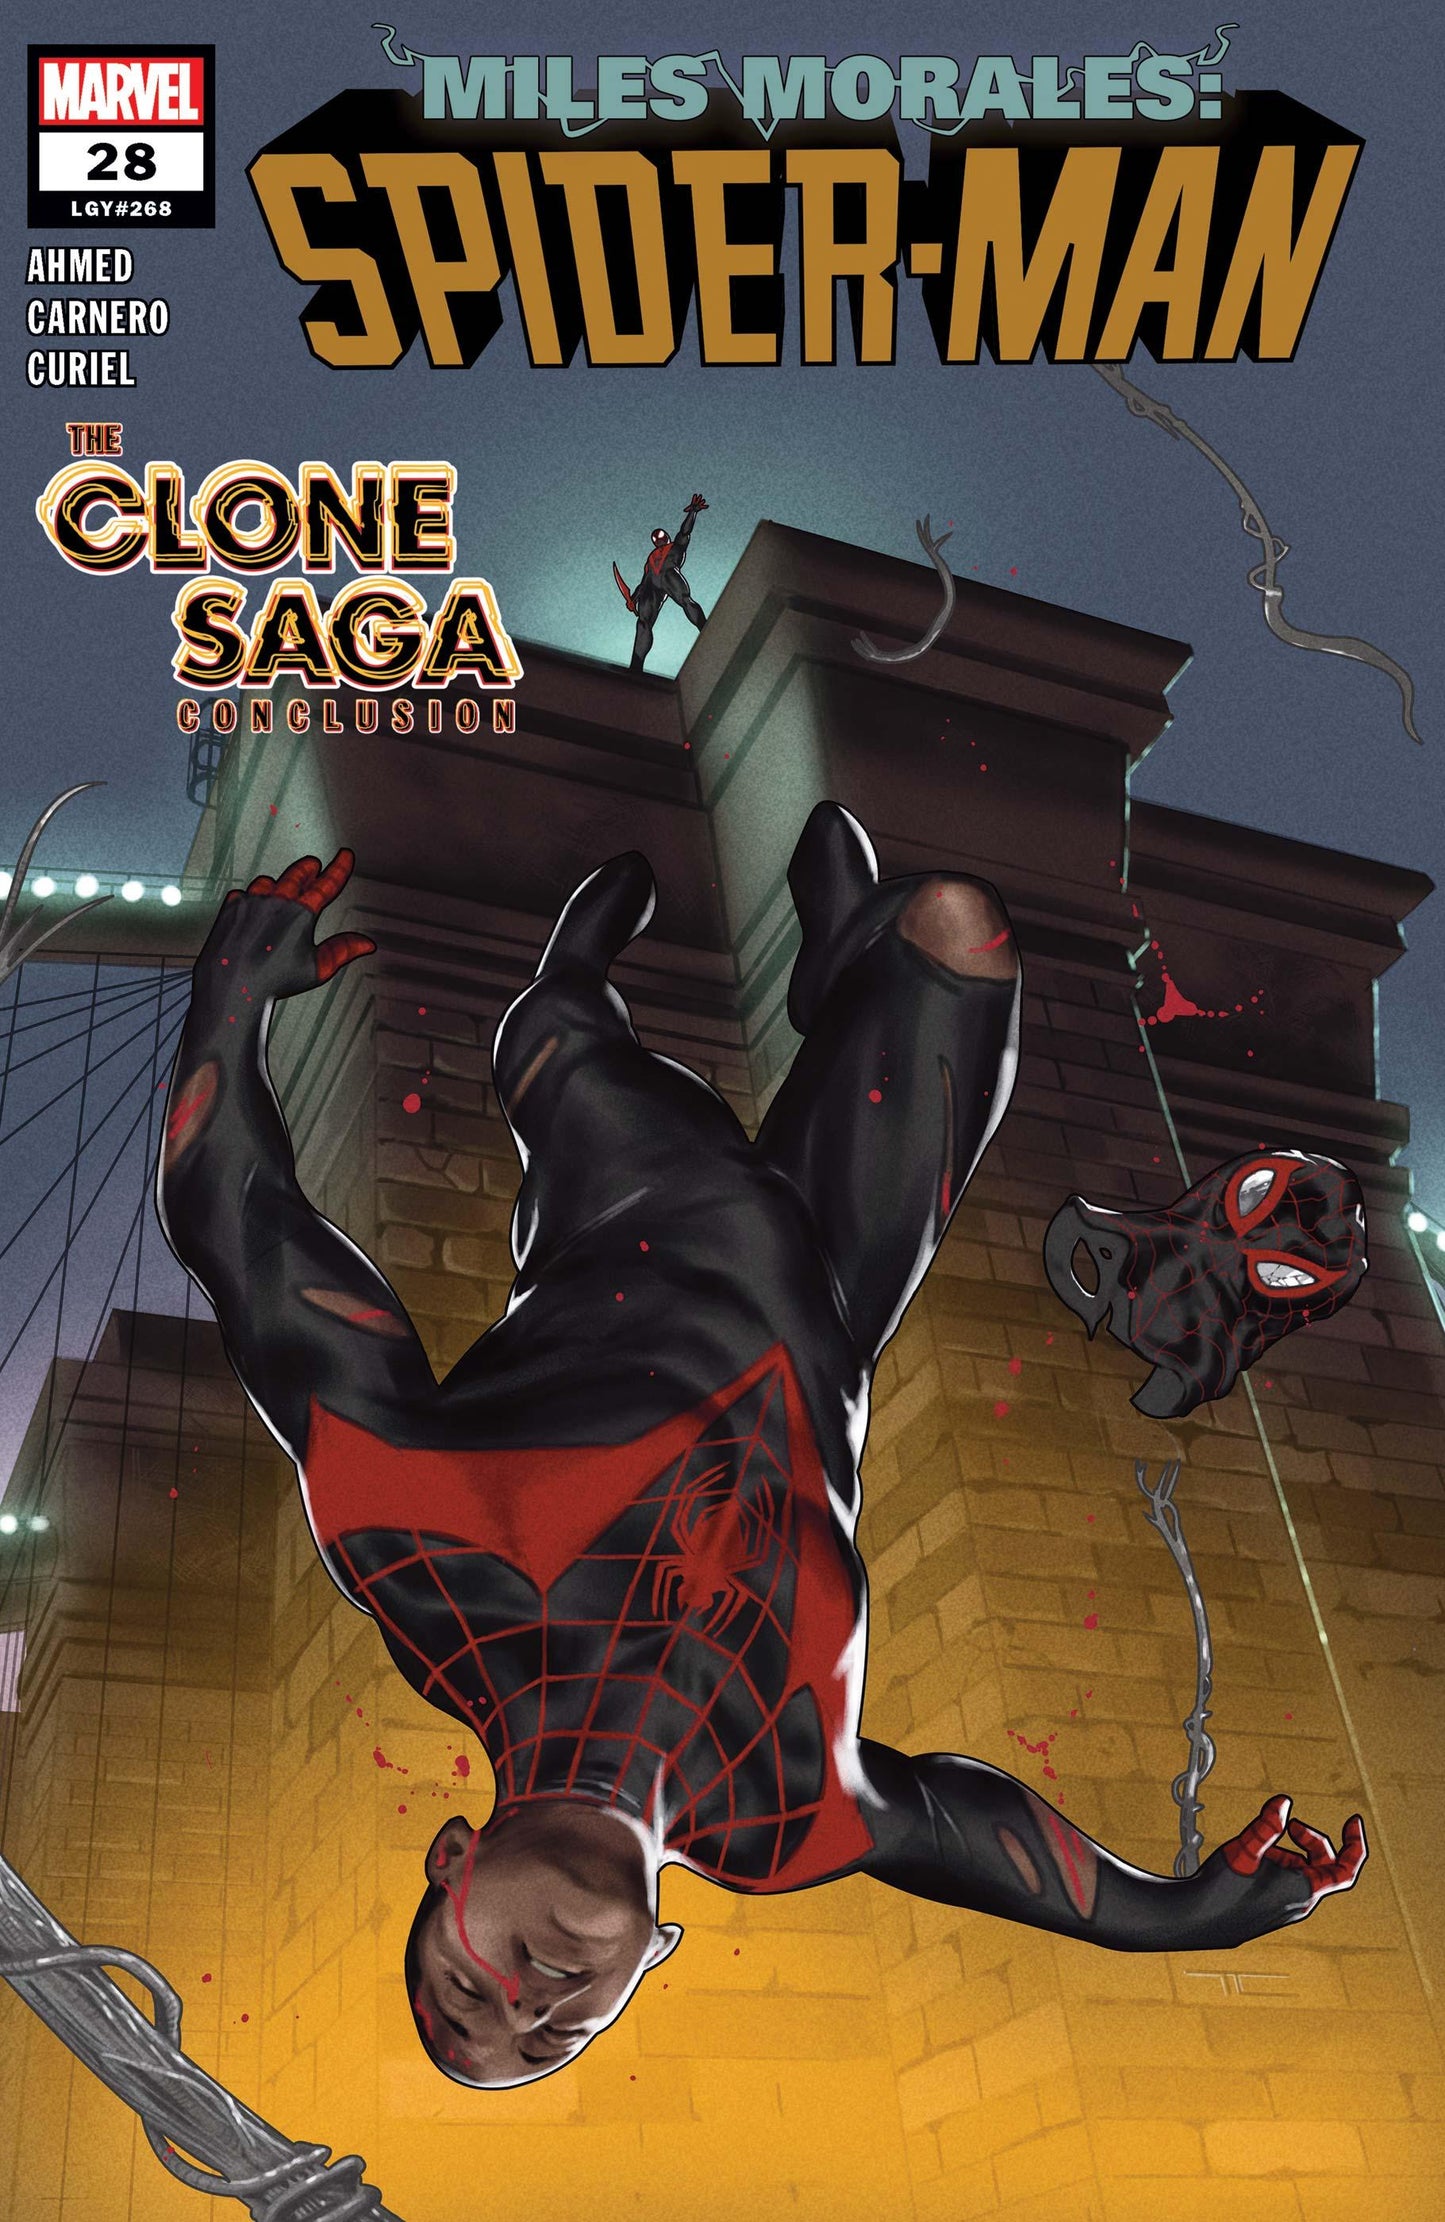 Miles Morales: Spider-man #28 - HolyGrail Comix